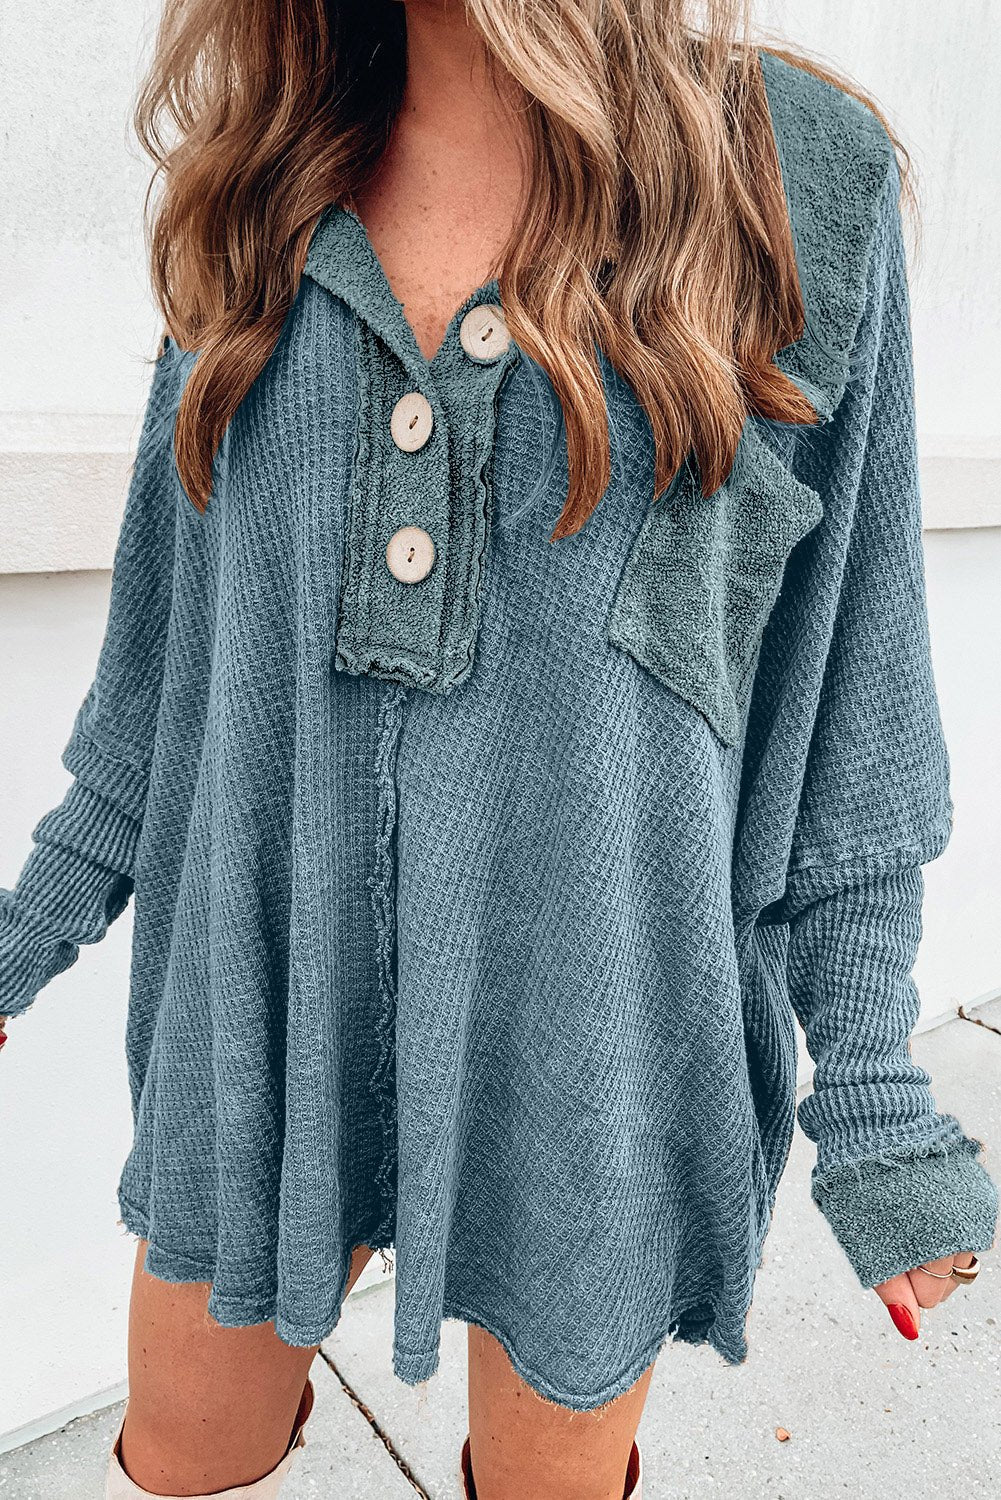 Waffle Knit Buttoned Long Sleeve Top with Breast Pocket - Fashion Girl Online Store